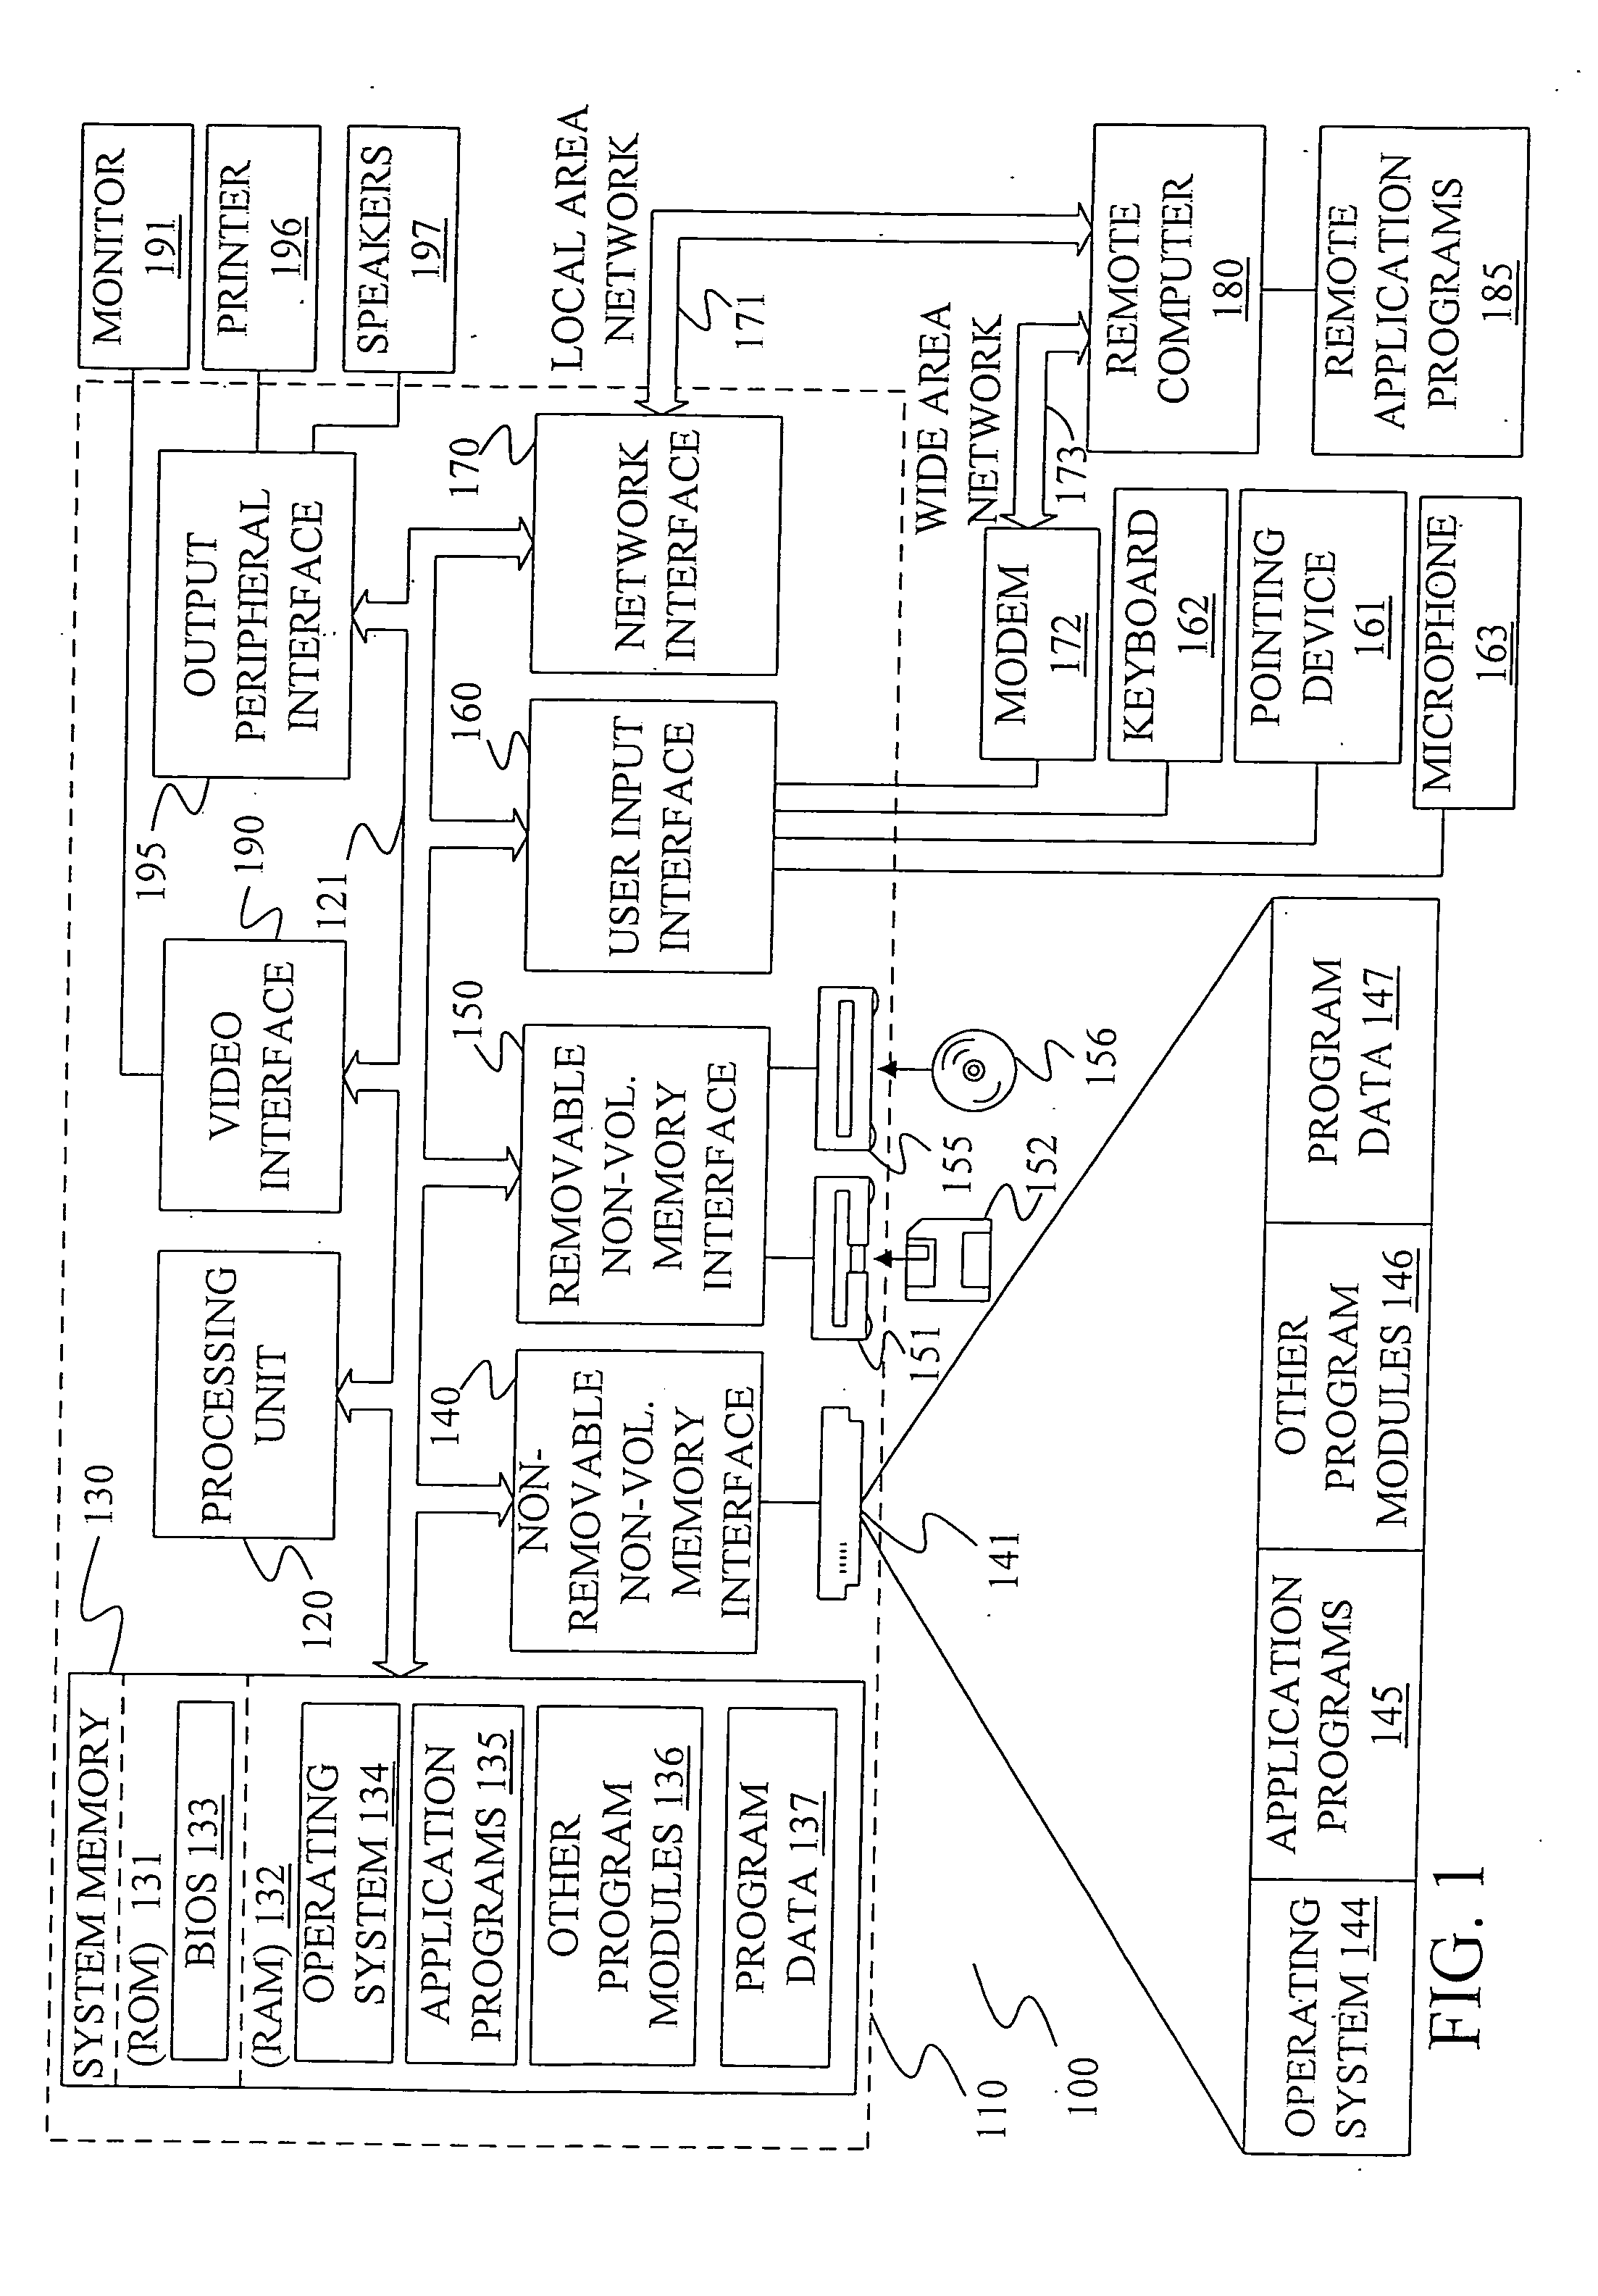 Method and apparatus for unsupervised training of natural language processing units